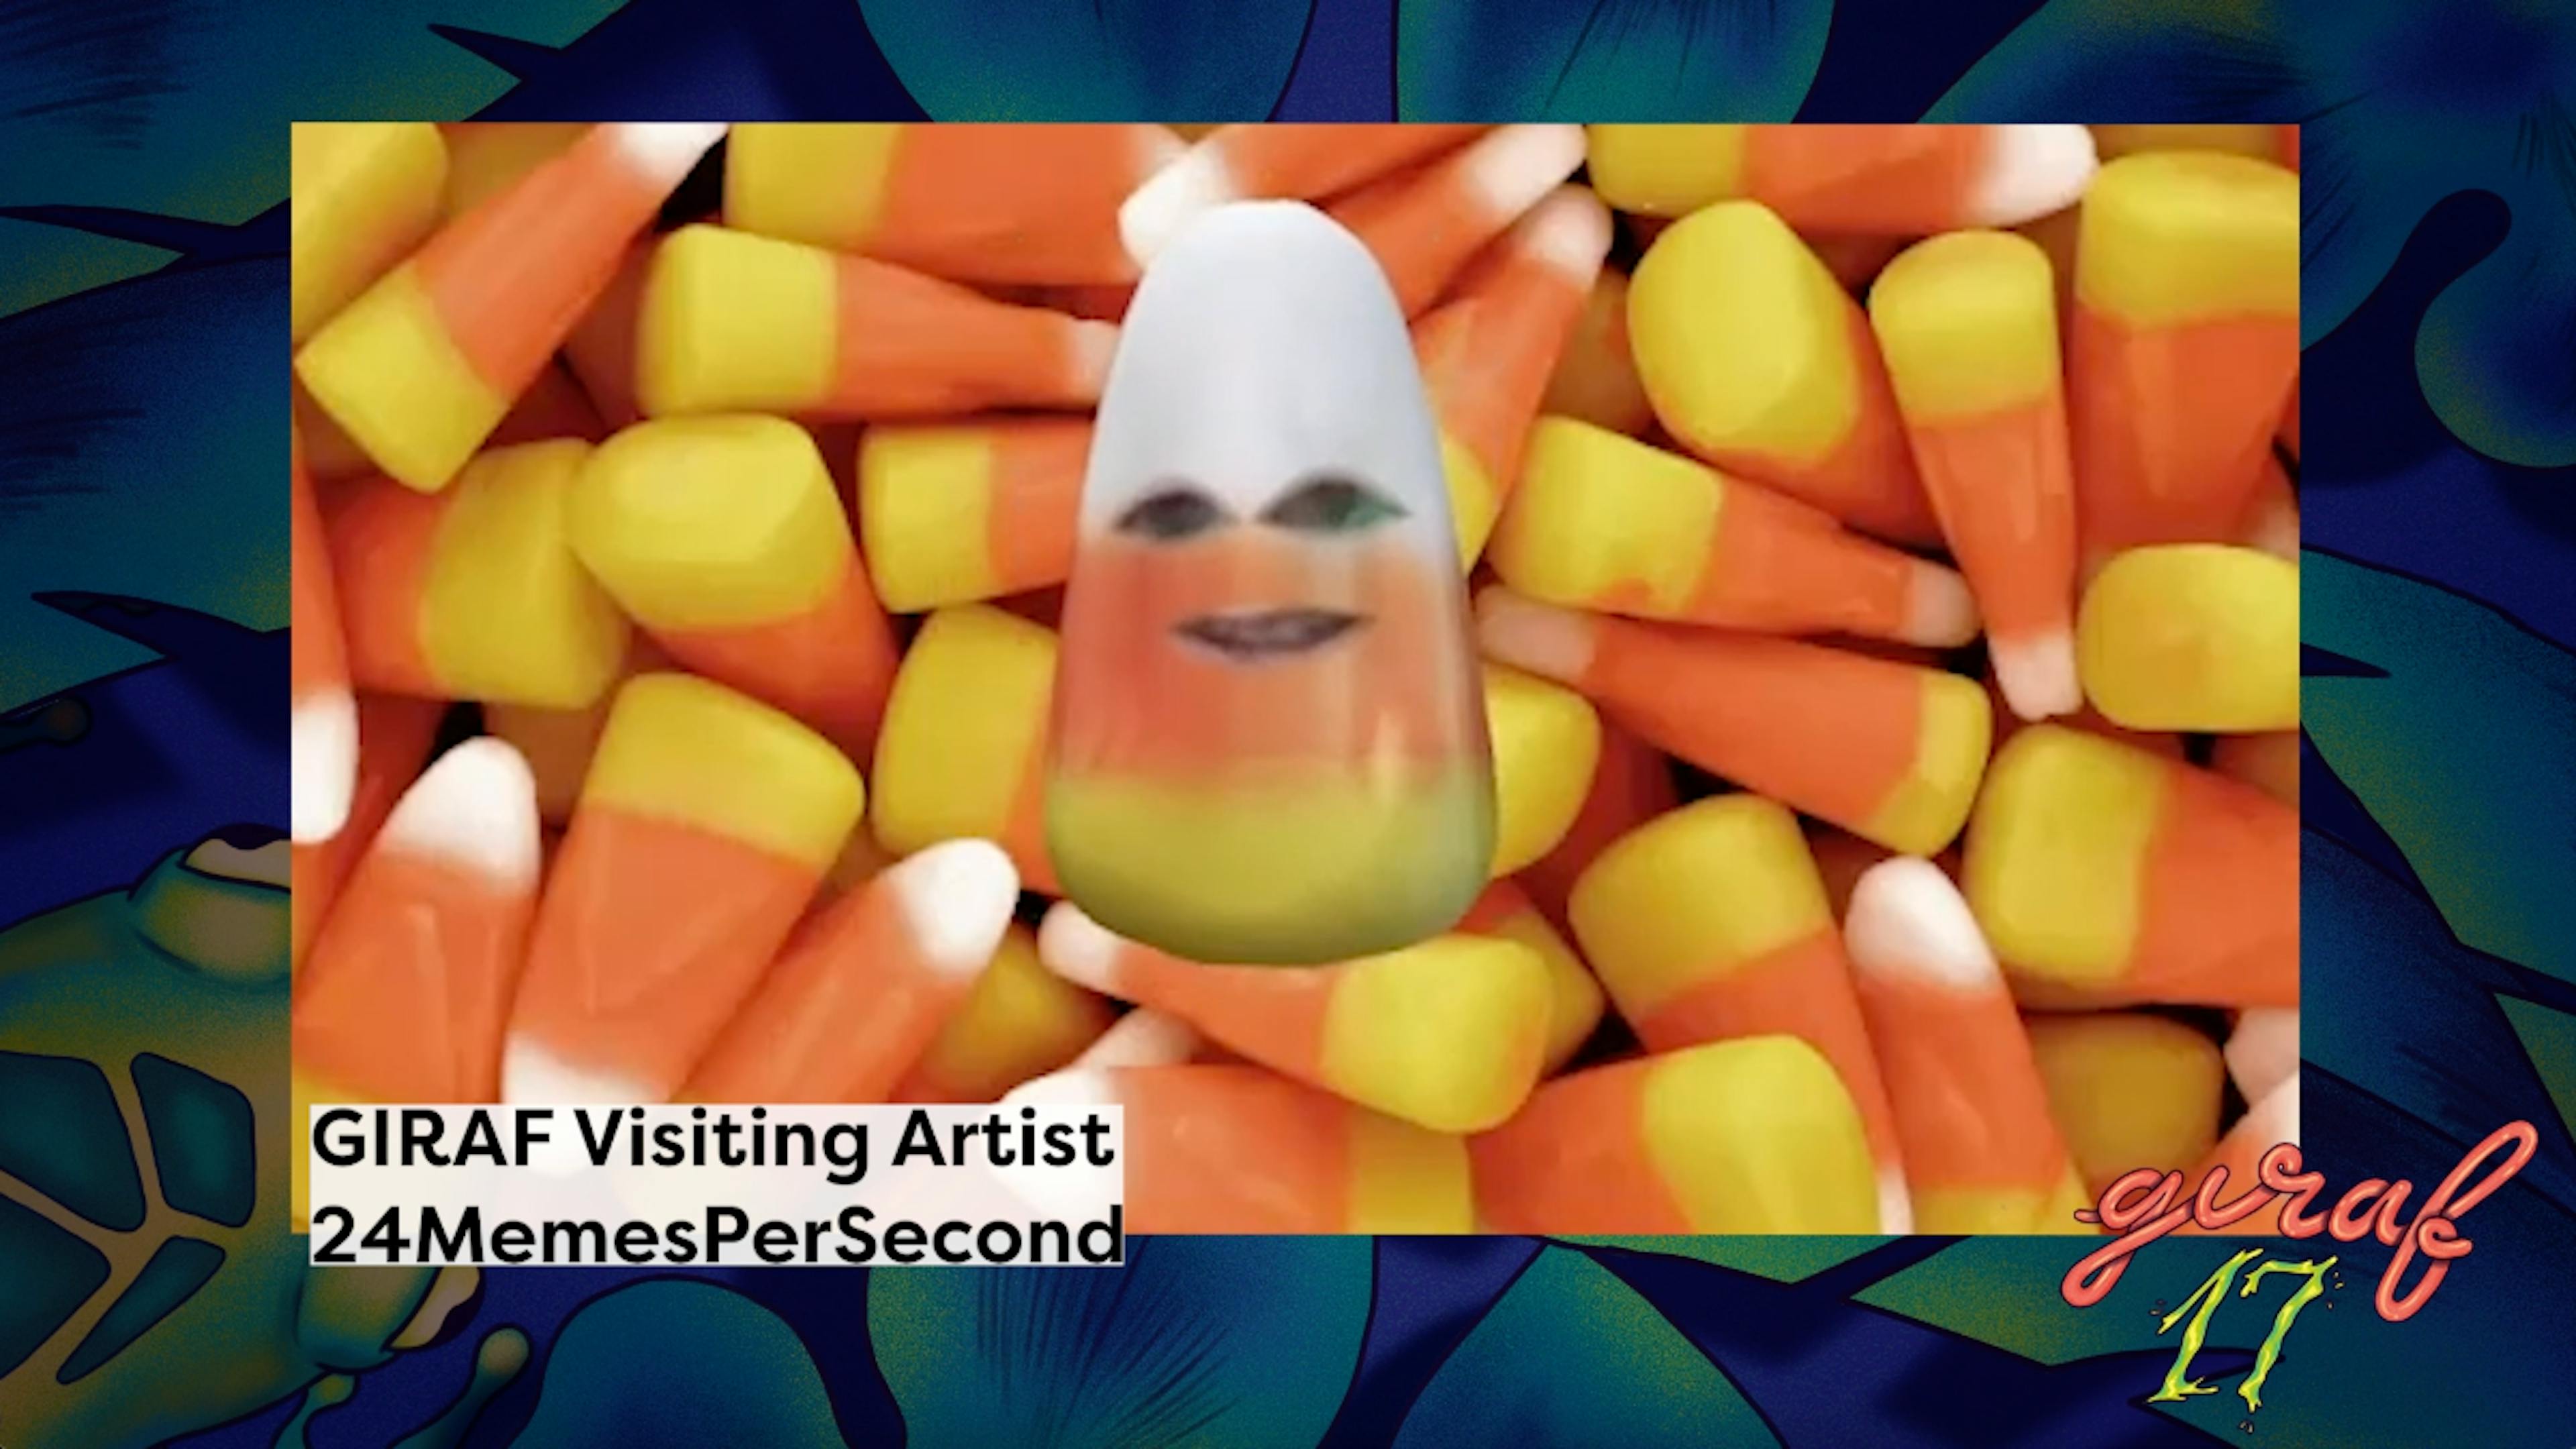 Screenshot of the guest artist talk at giraf 17 with 24memespersecond. Image is of the graf17 frame with the logo displayed in the bottom right corner. In the center of the frame is someone on a Zoom call but with a filter to give them the appearance of candy corn. The bottom left caption reads "GIRAF Visiting Artist 24MemesPerSecond